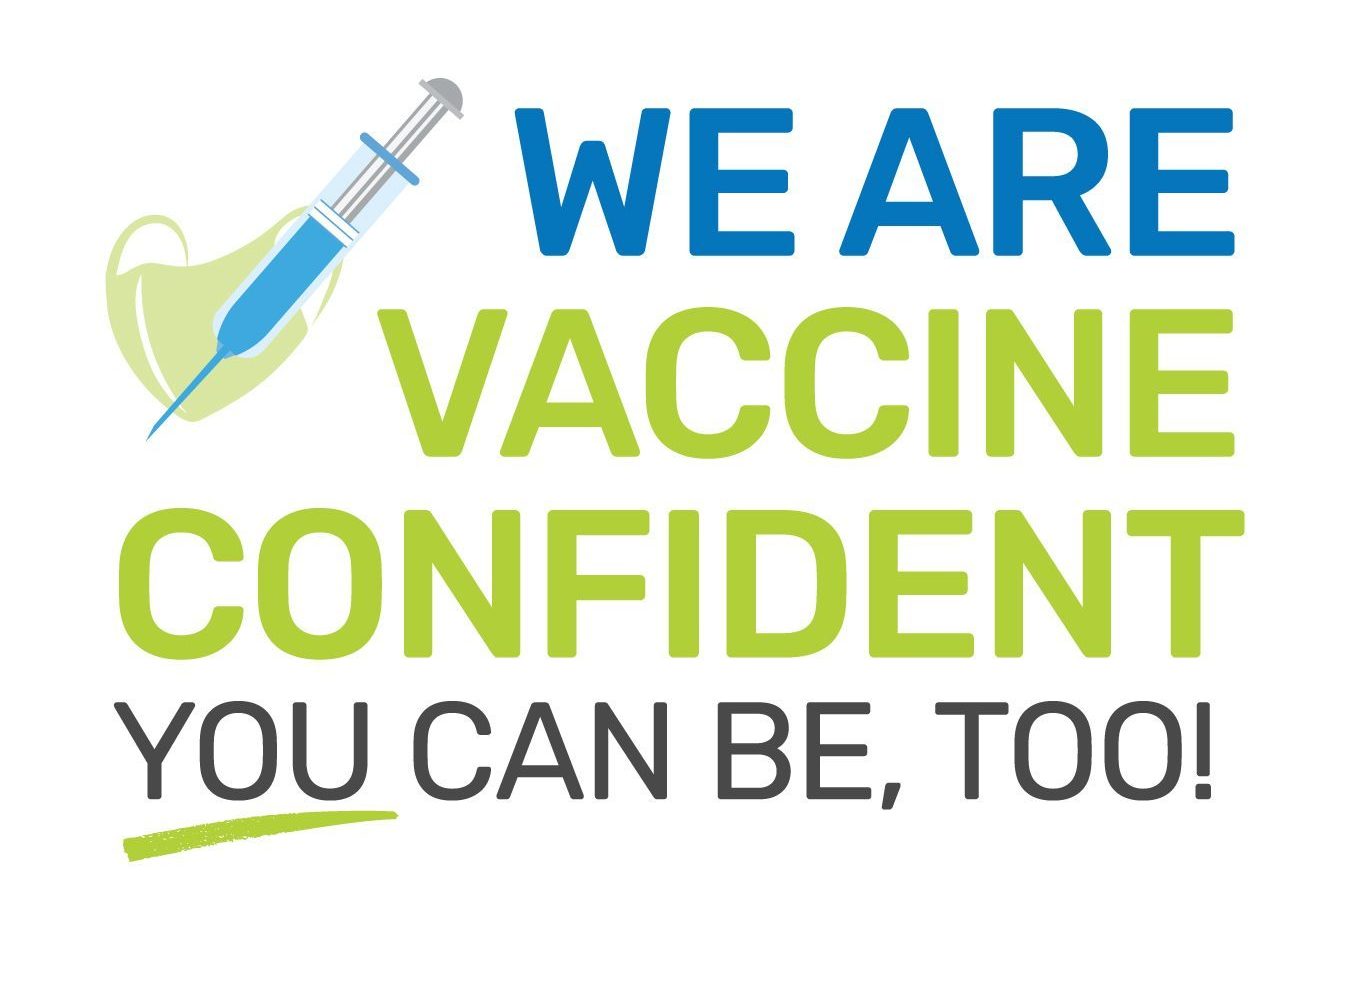 We Are Vaccine Confident. You can be, too!